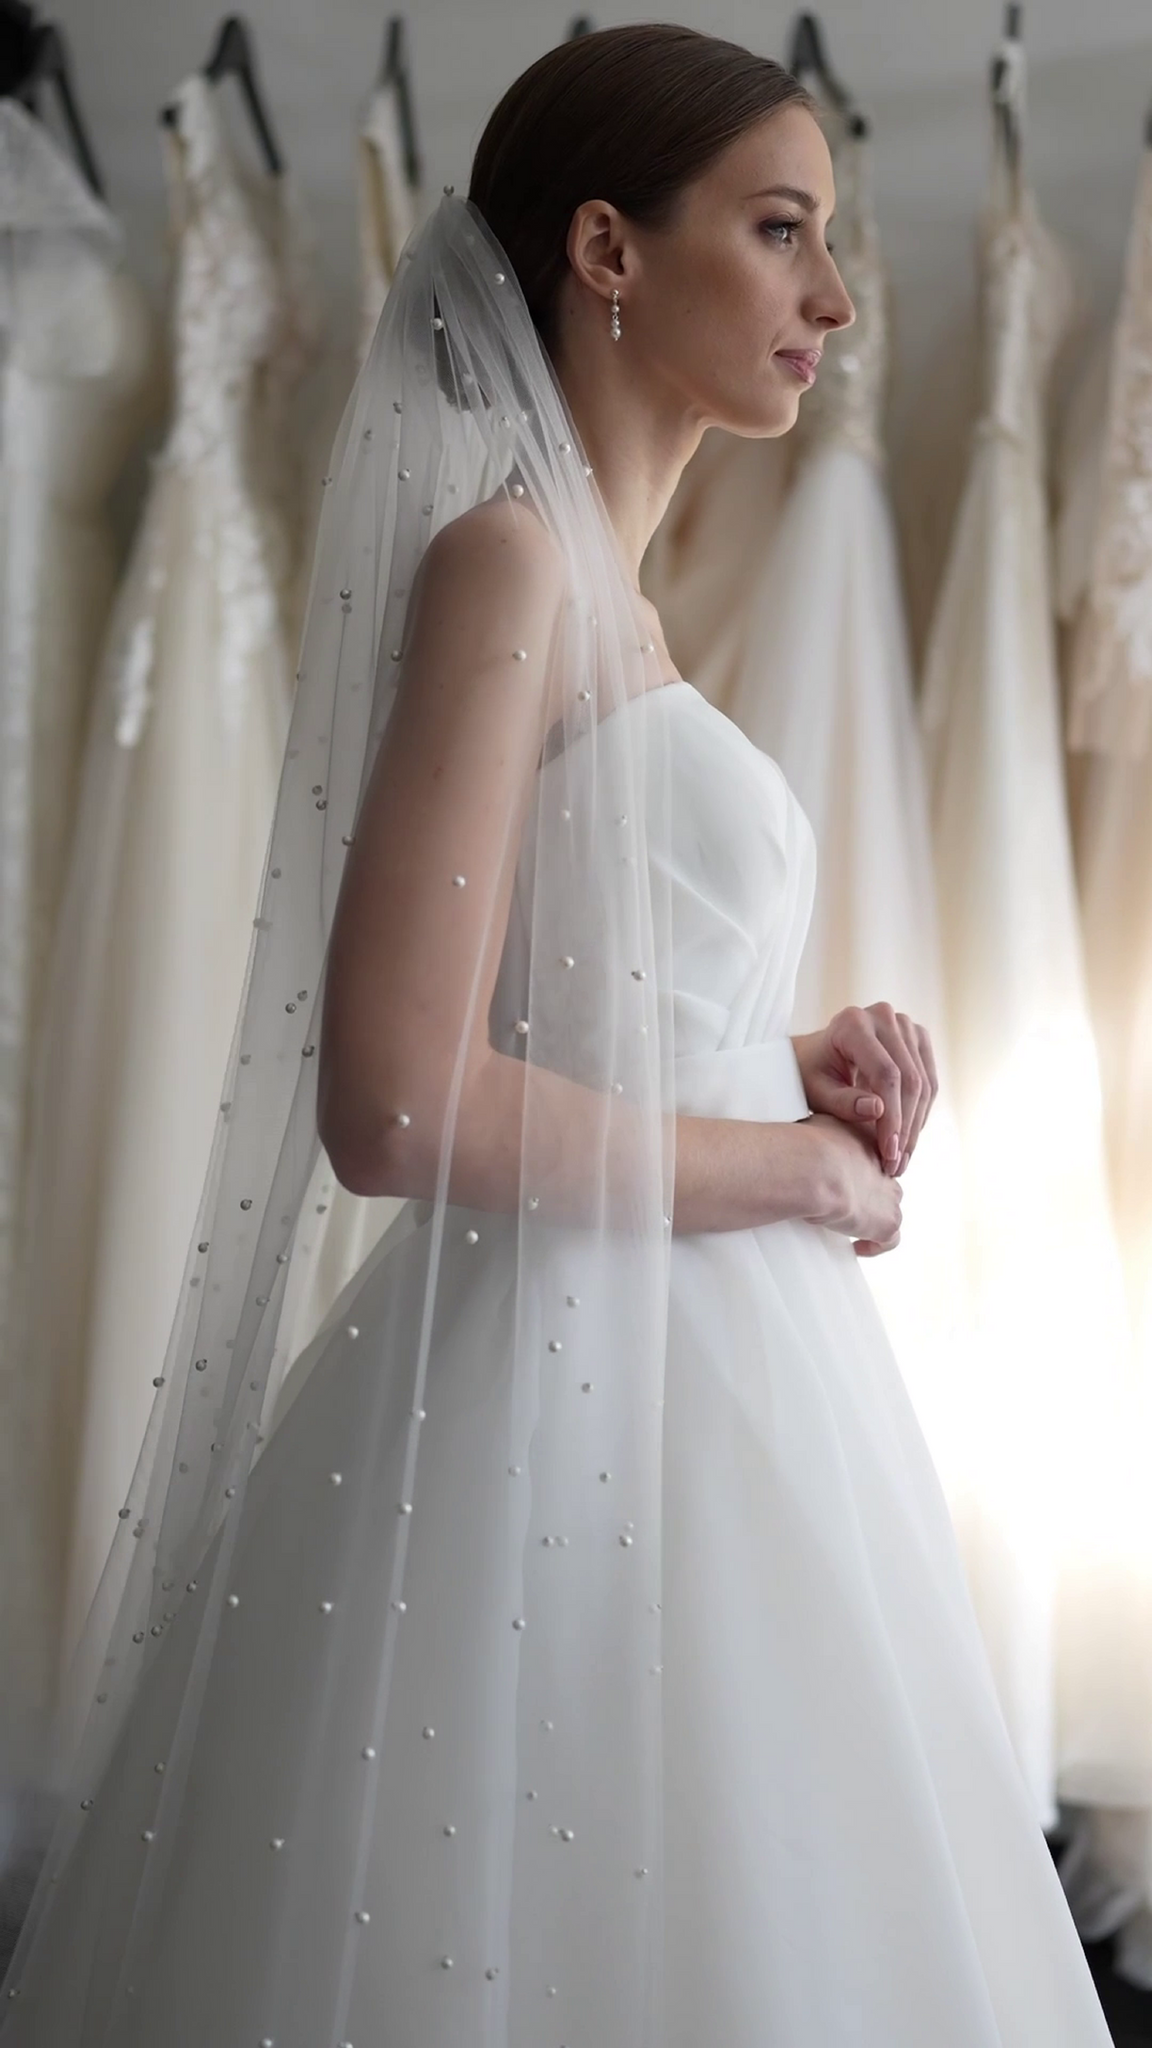 Wedding Pearl Veil Pure White / Chapel - 90 Inches (in The Photos)